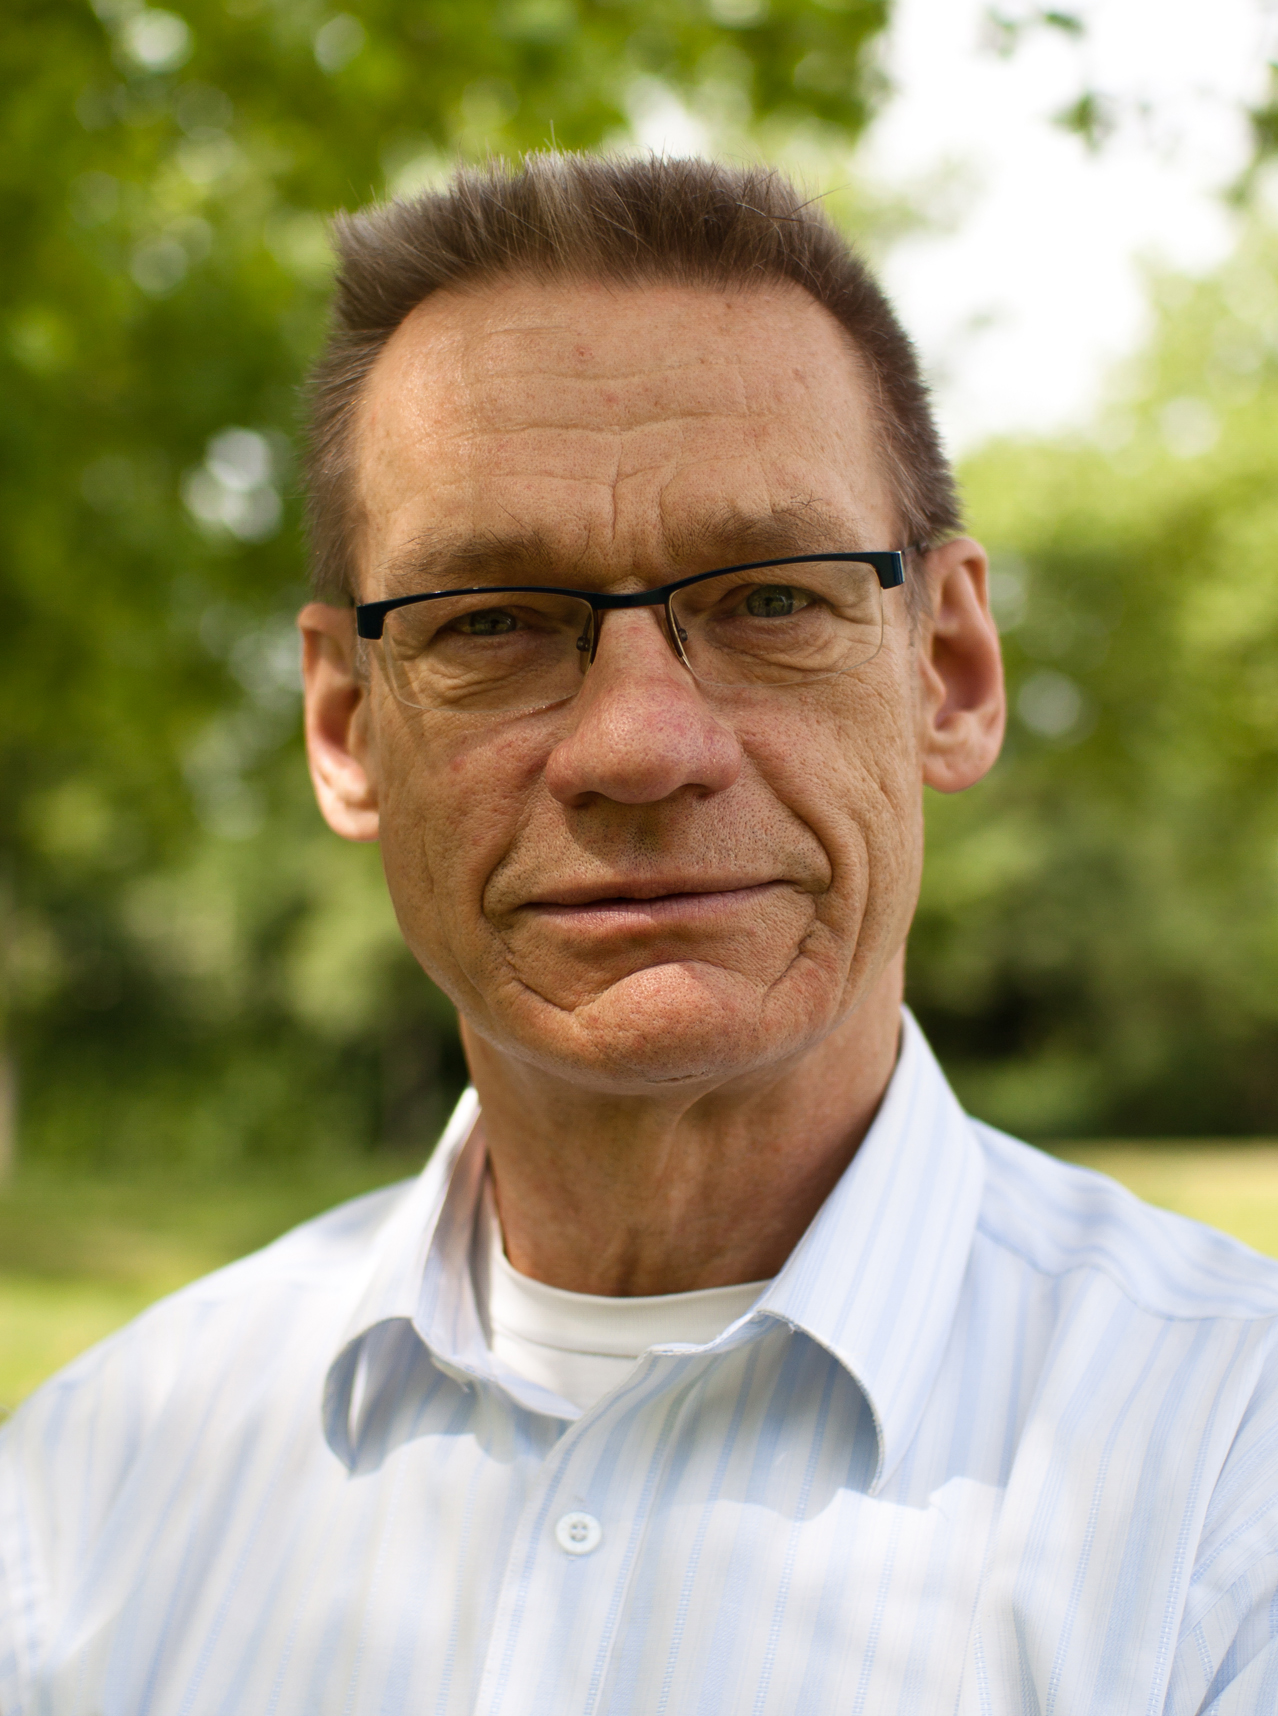 Dr. Jan Andersson